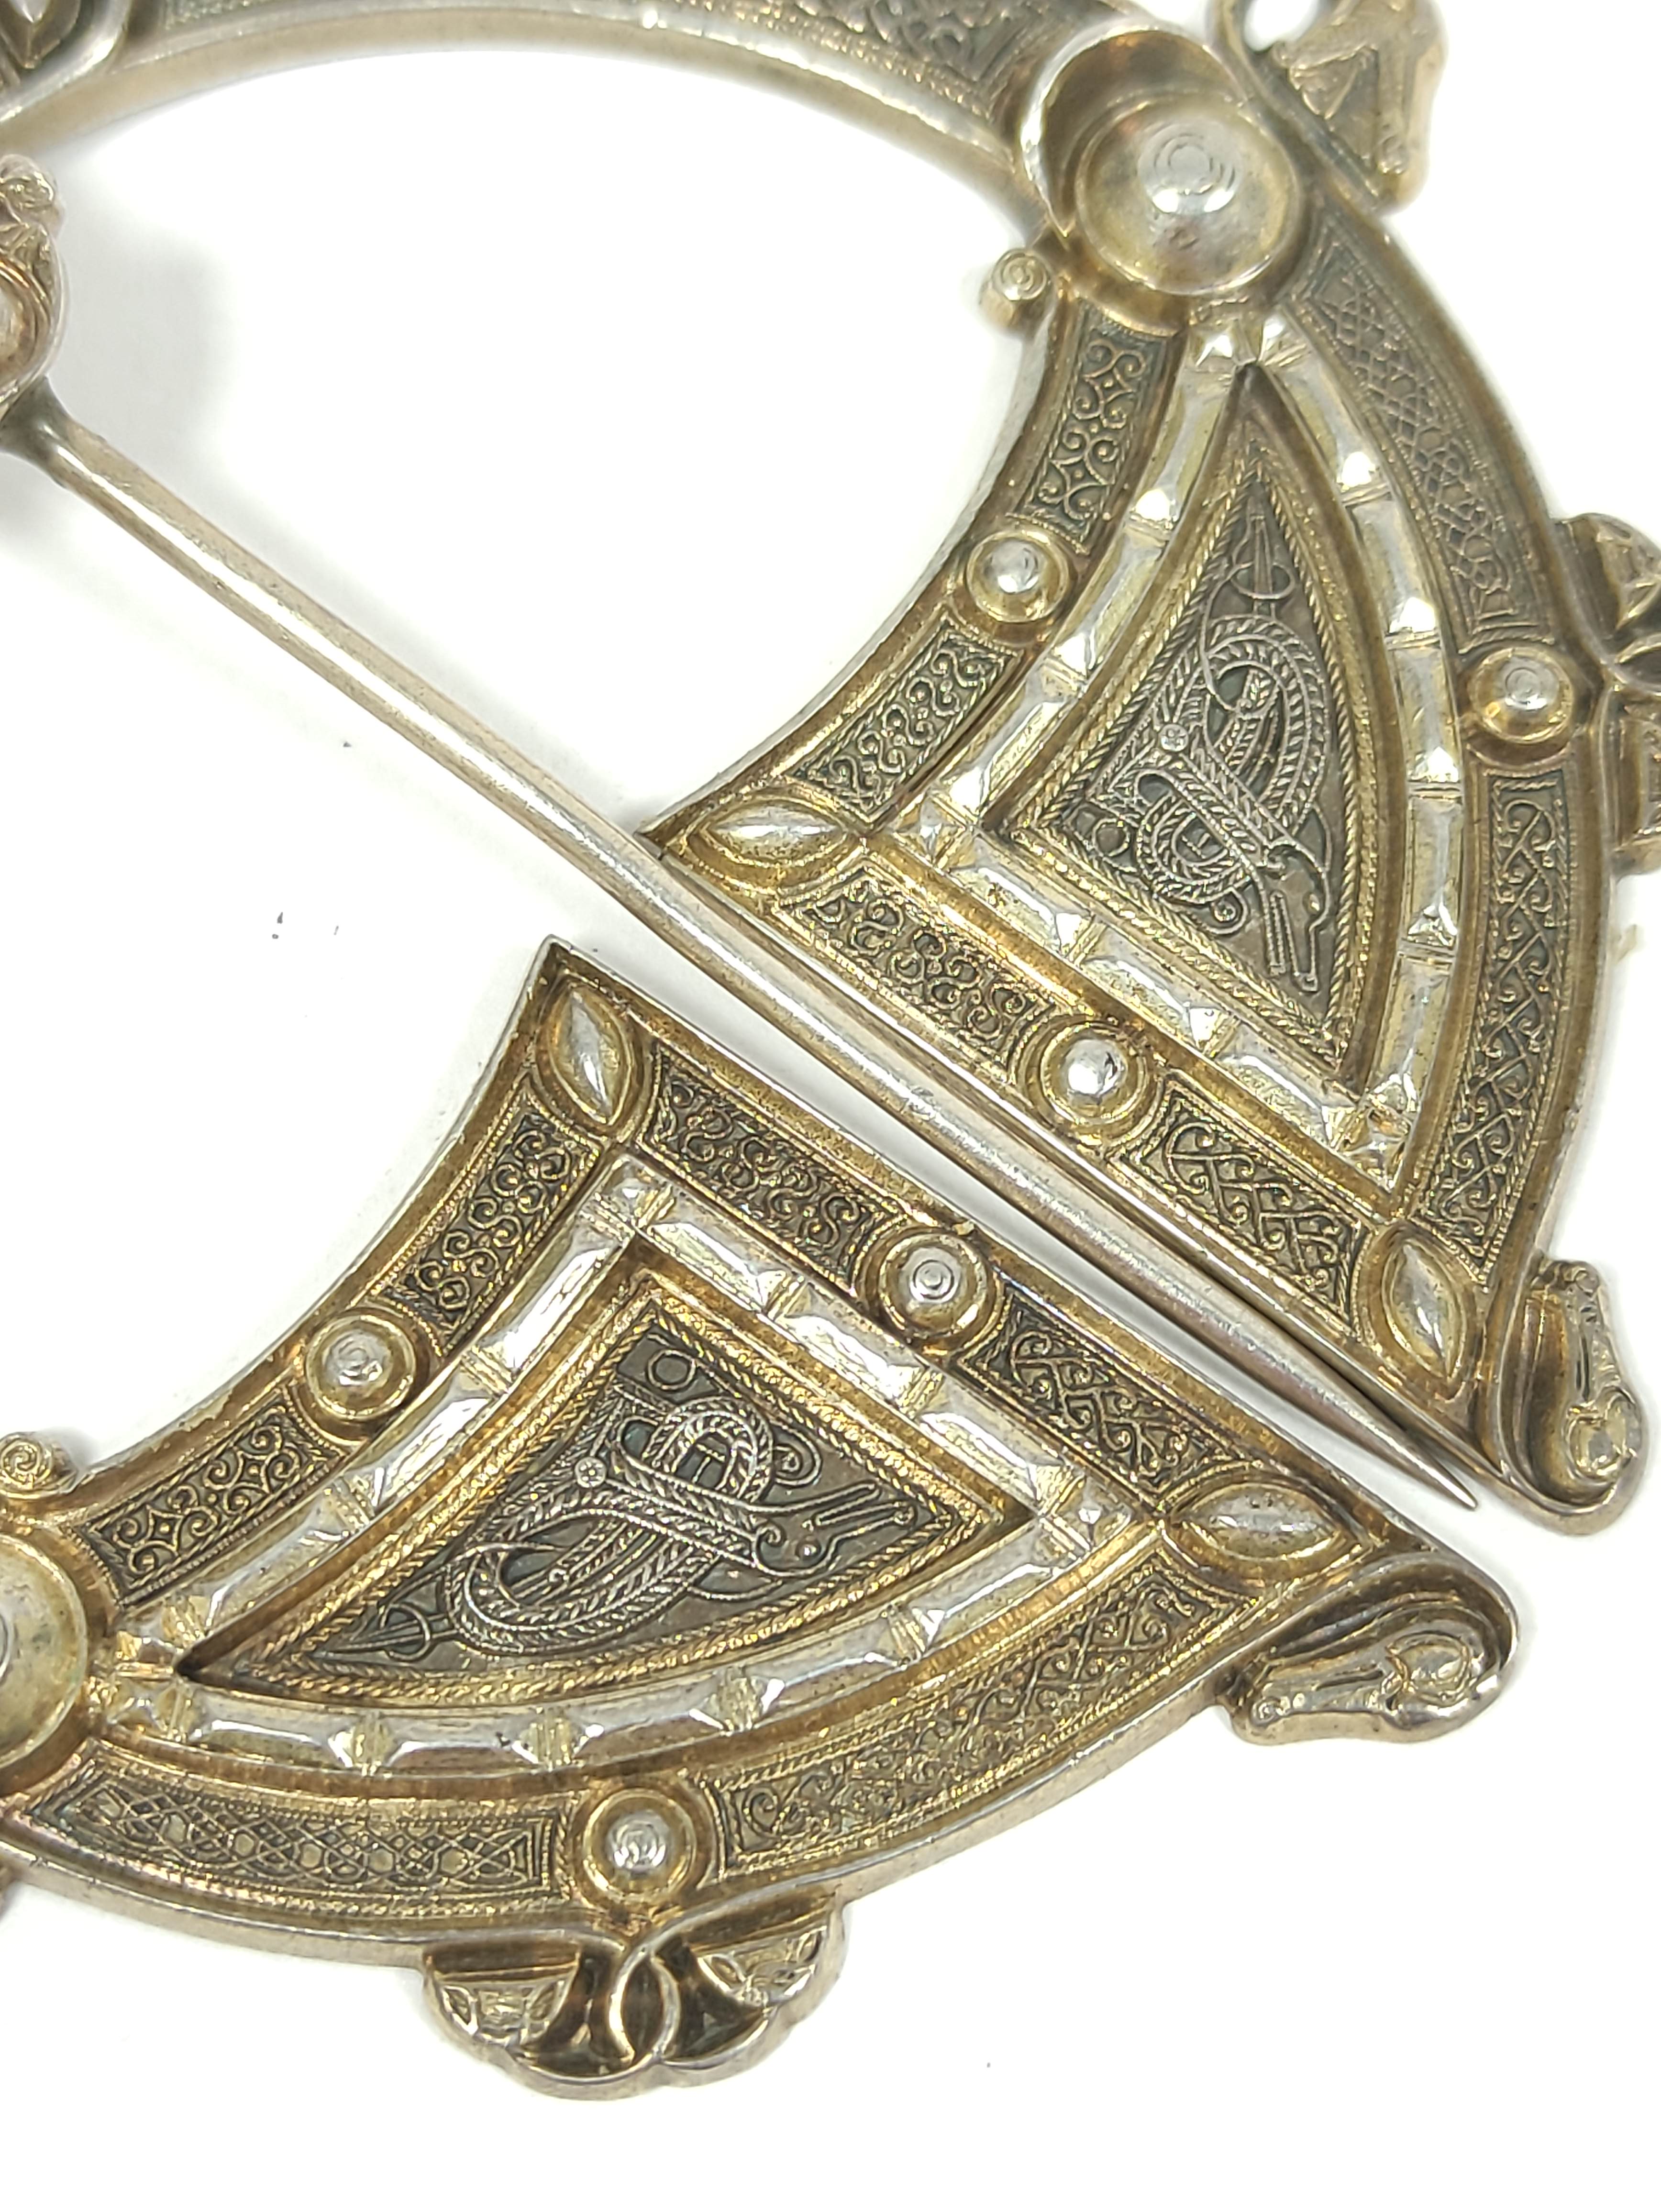 Silver gilt penannular pin, unmarked with embossed Celtic motifs and plain back, 70mm. - Image 3 of 4